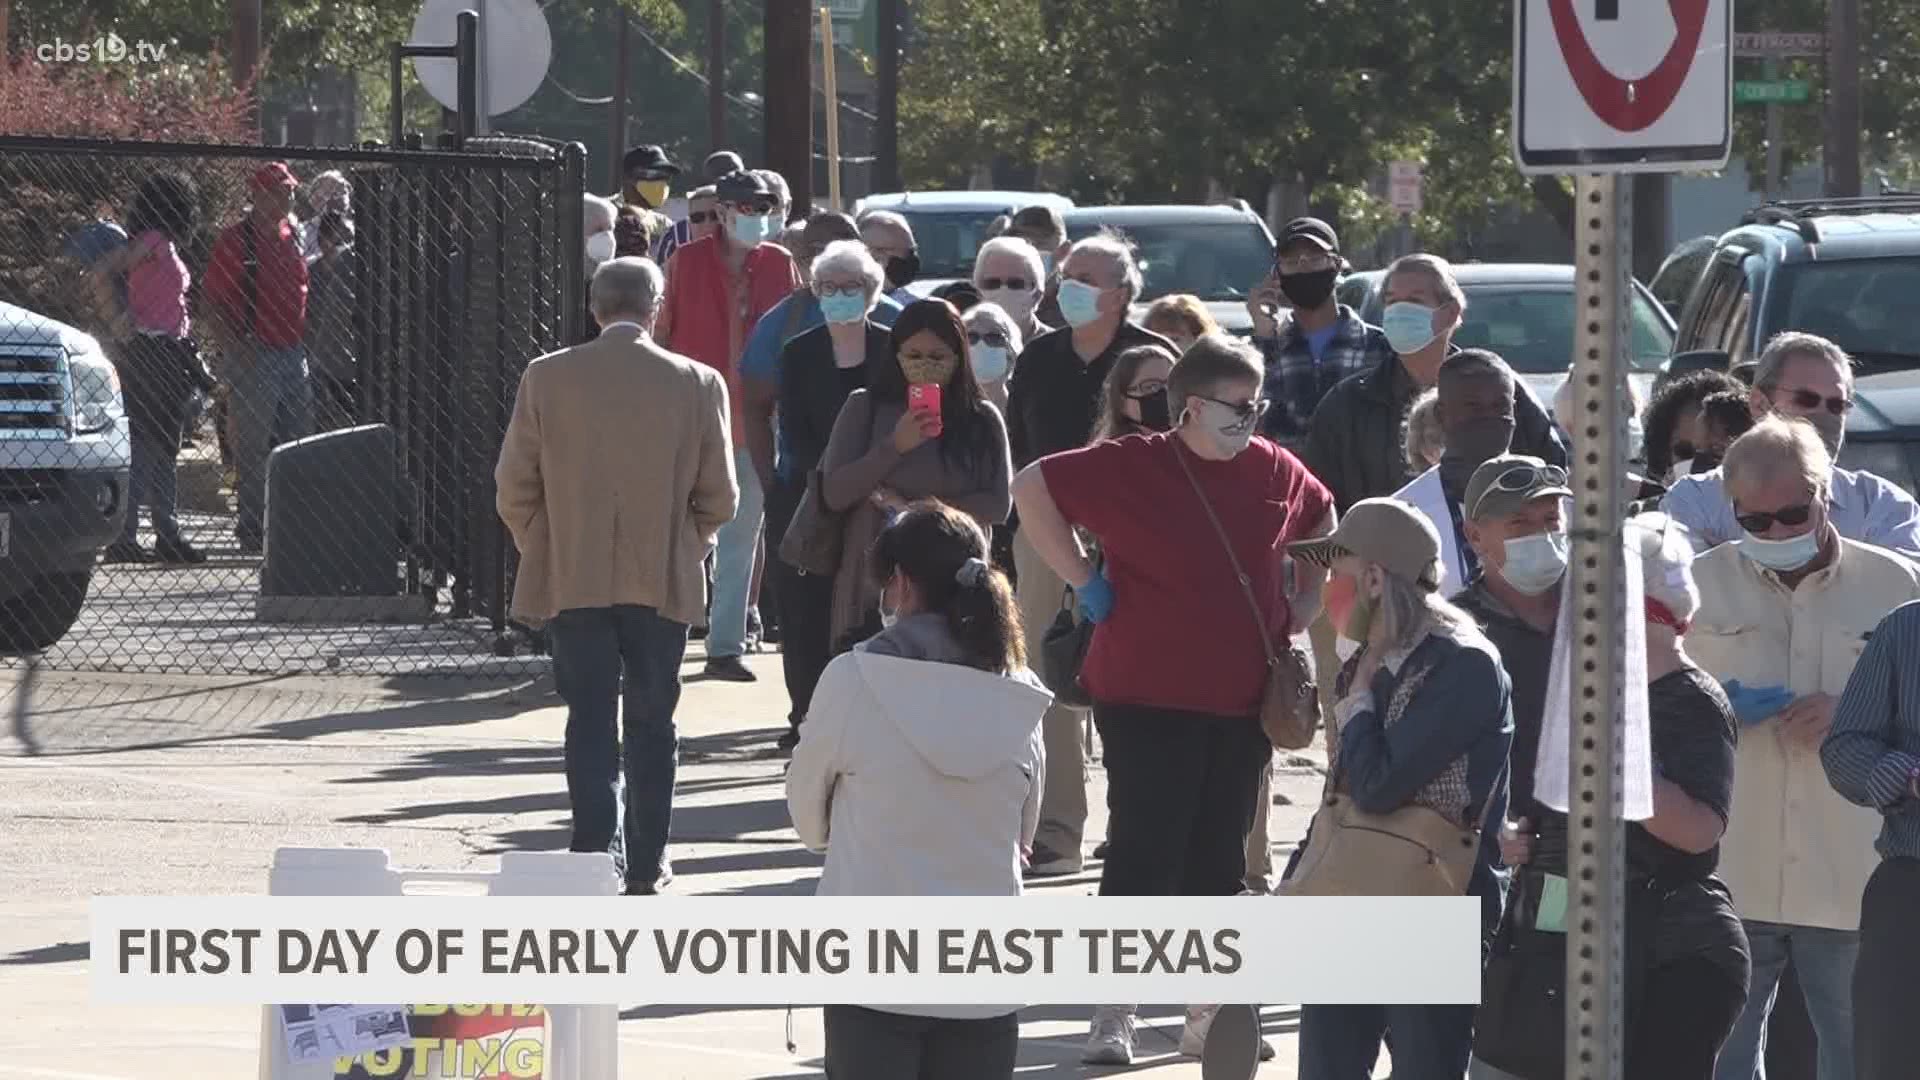 Early voting is encouraged for the 2020 general election.